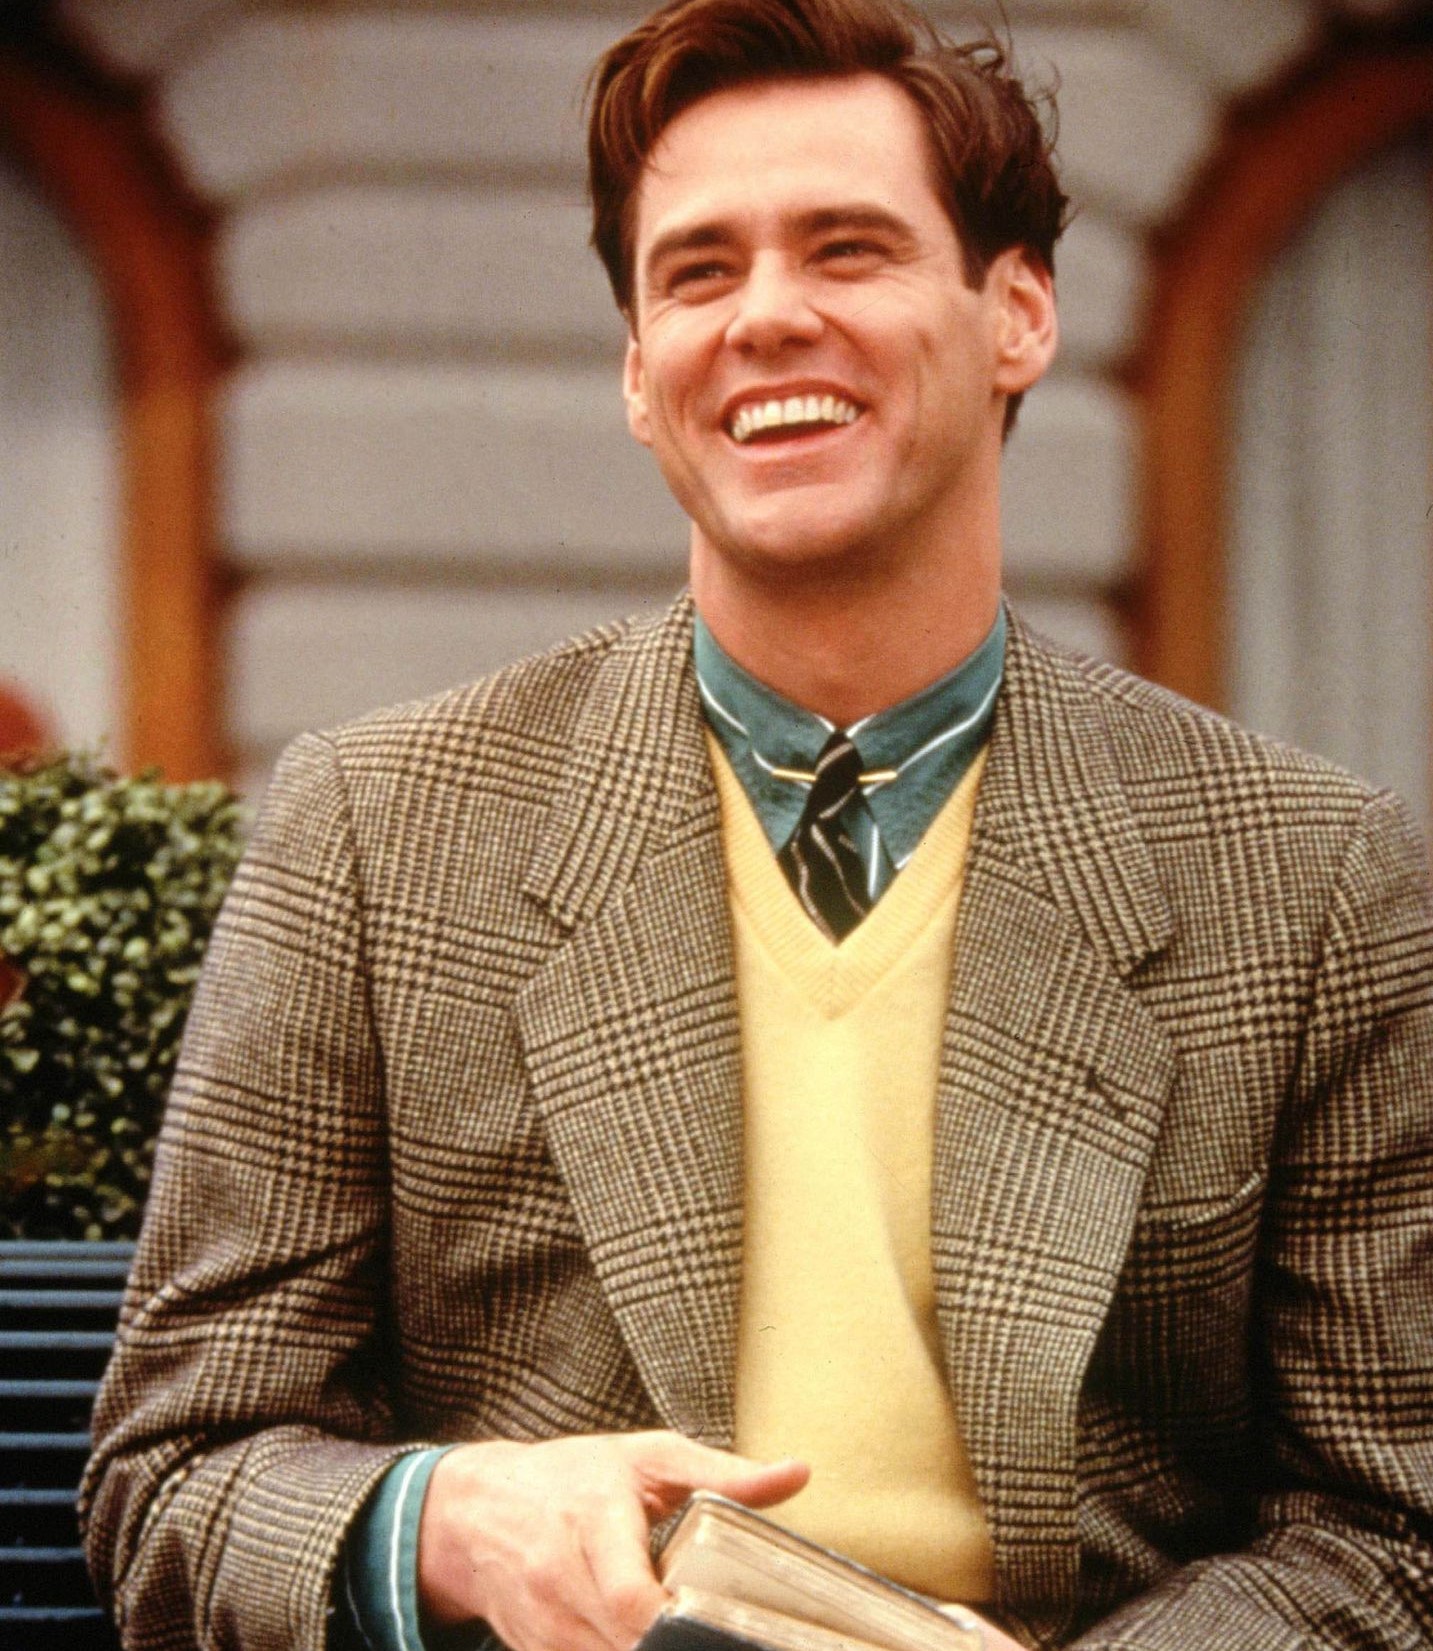 What The Truman Show Can Illustrate About Church